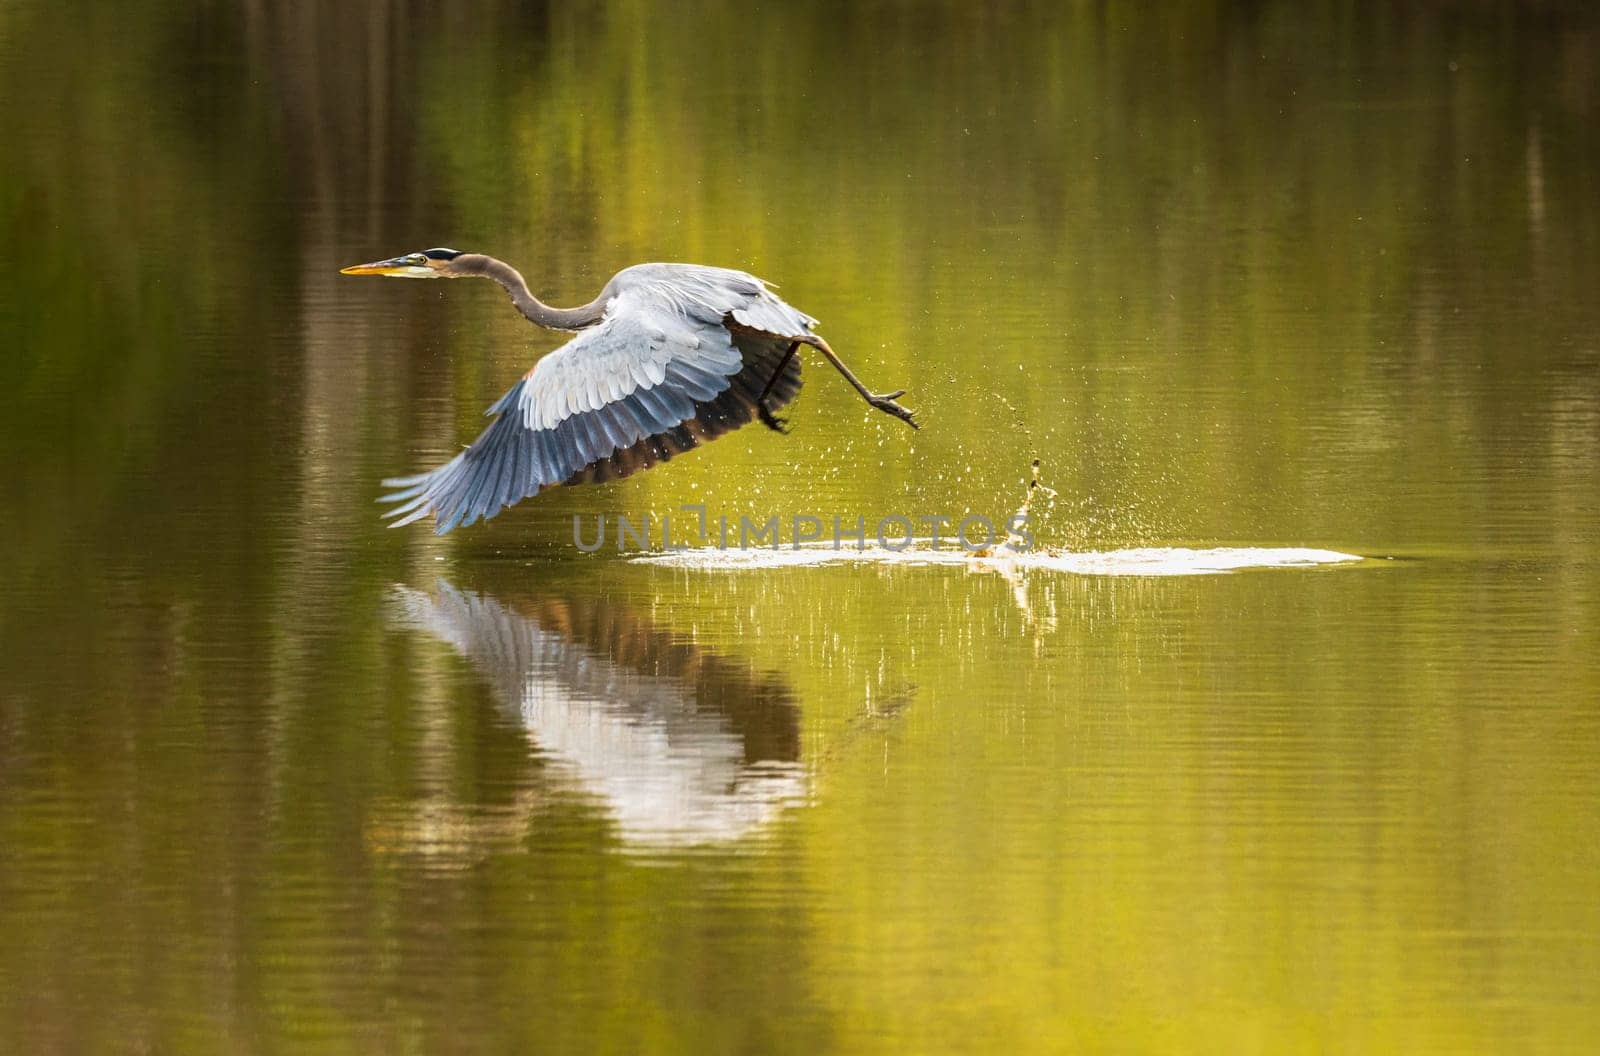 Great blue heron bird flying after taking off from calm waters of Atchafalaya Basin near Baton Rouge Louisiana